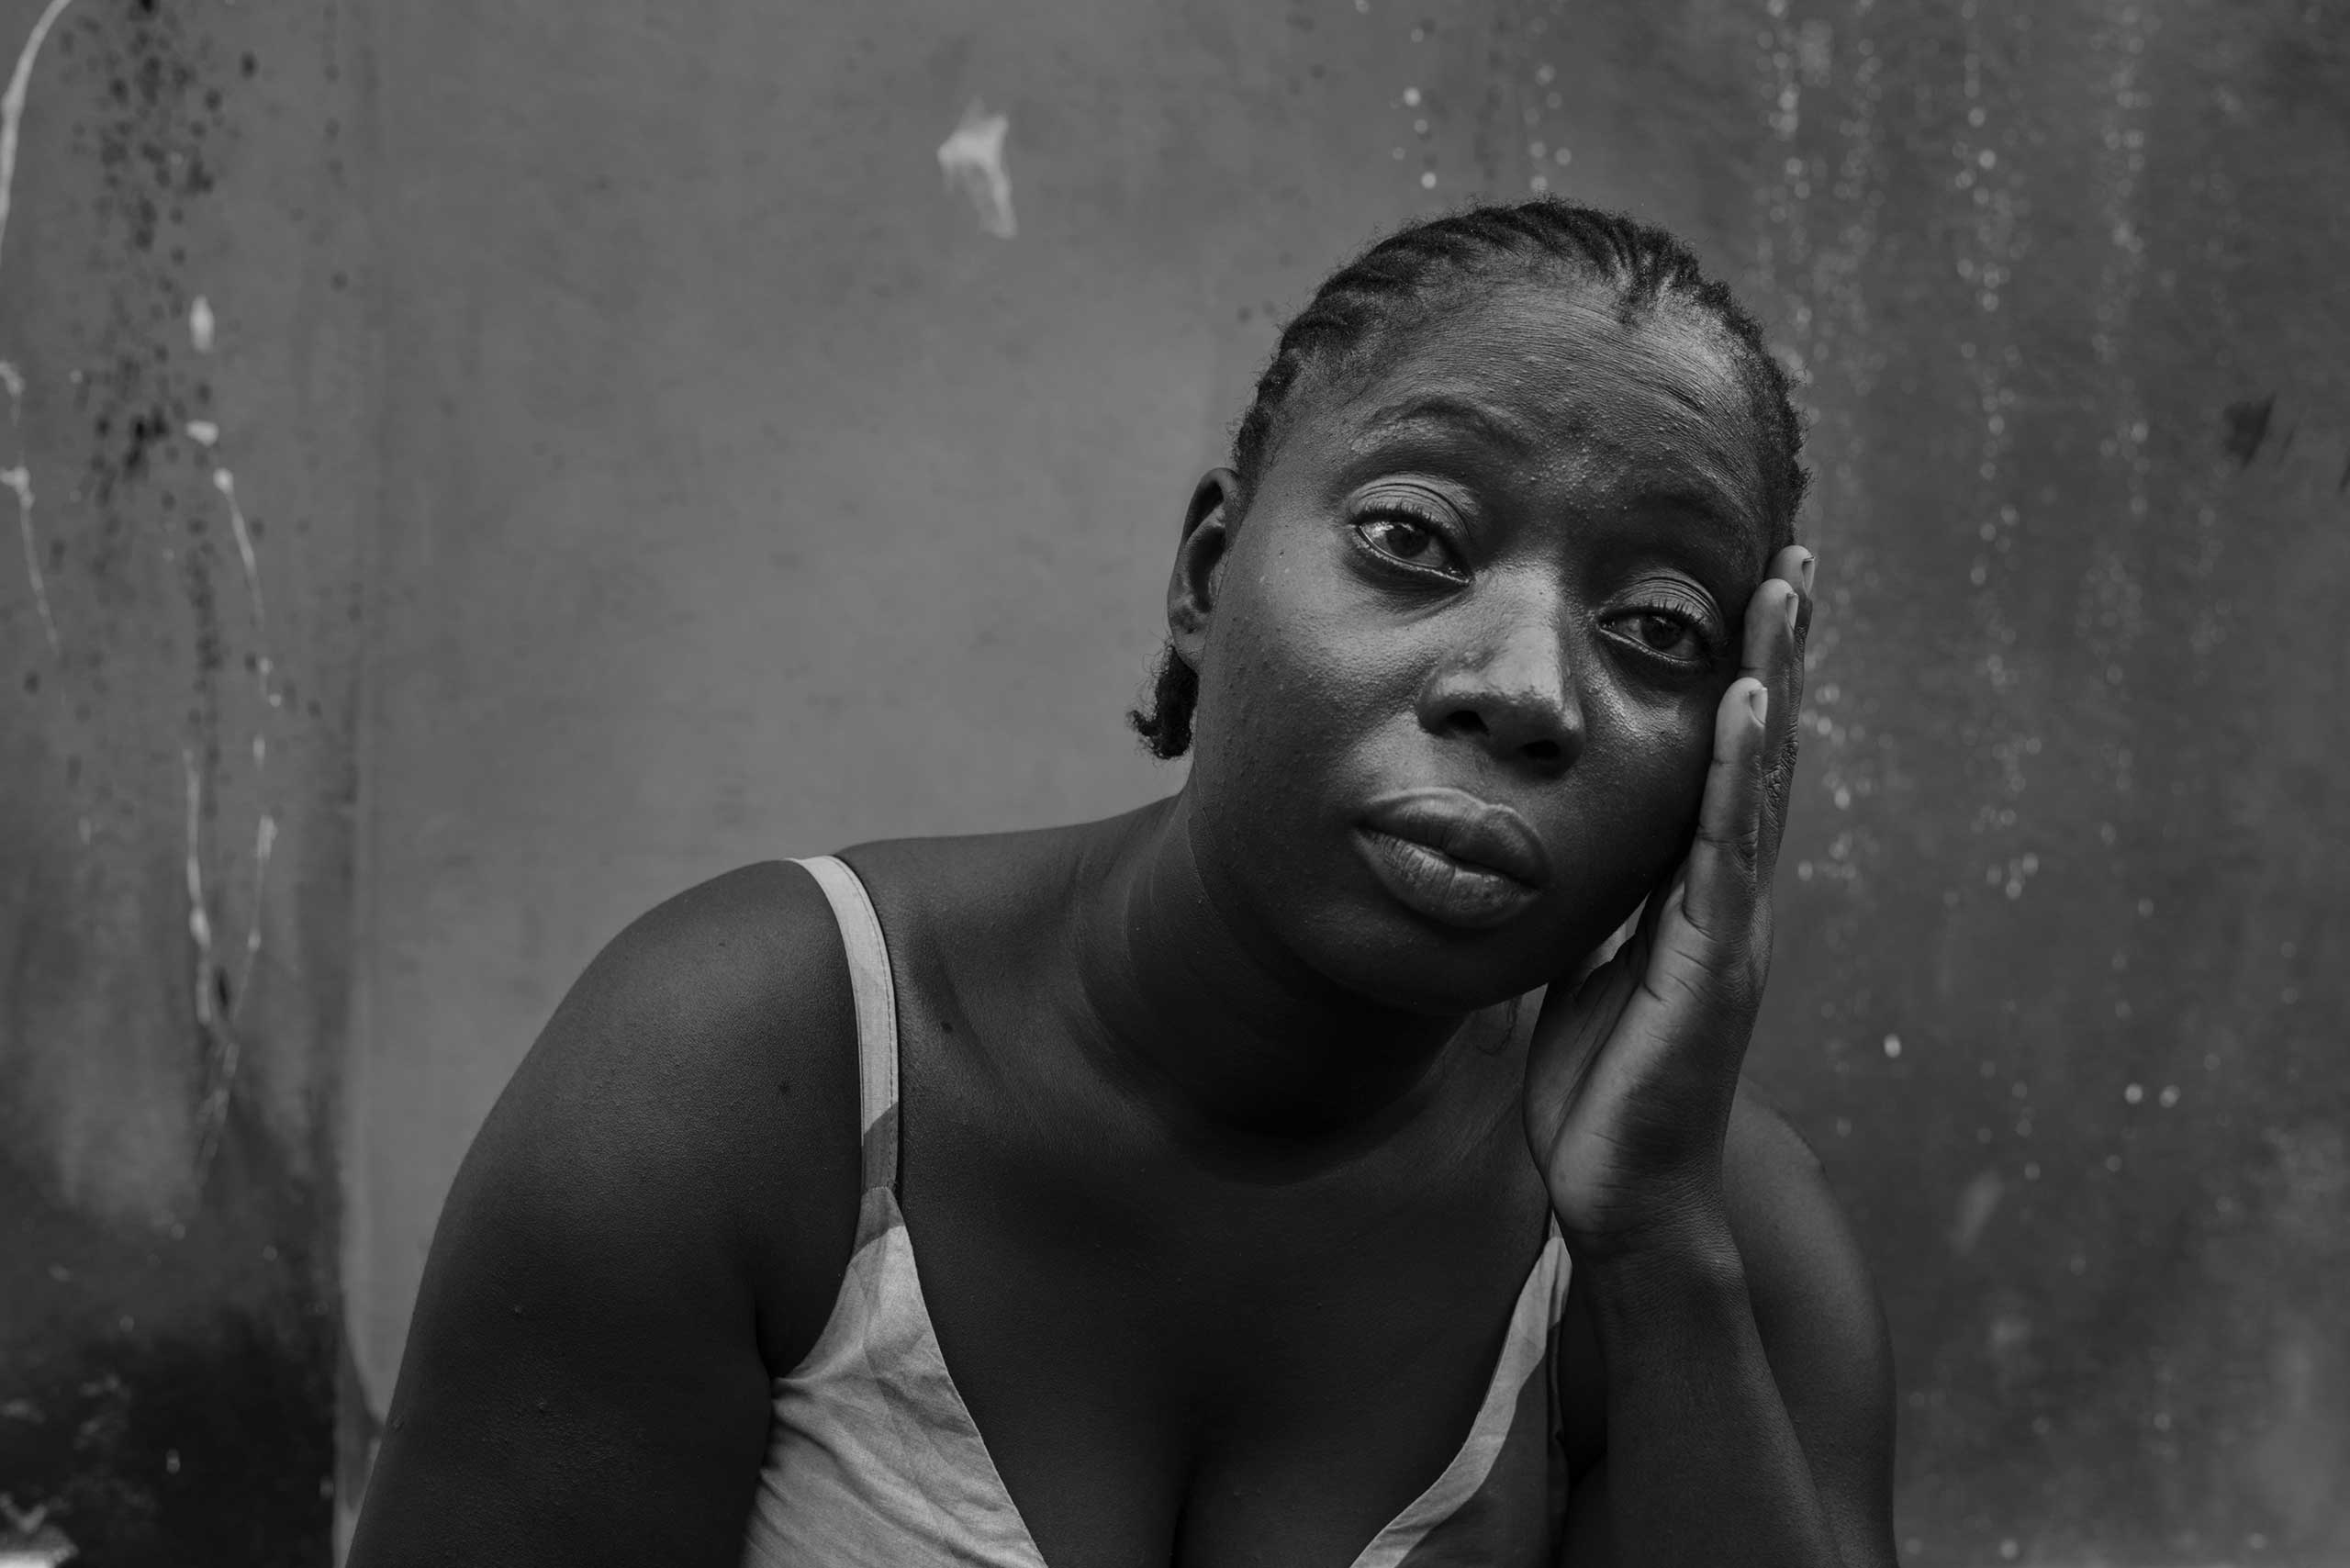 Deedee Urey whose husband and 4 month old baby died in September of Ebola, cries as she ponders her ordeal on Nov. 11, 2014 in Monrovia, Liberia.